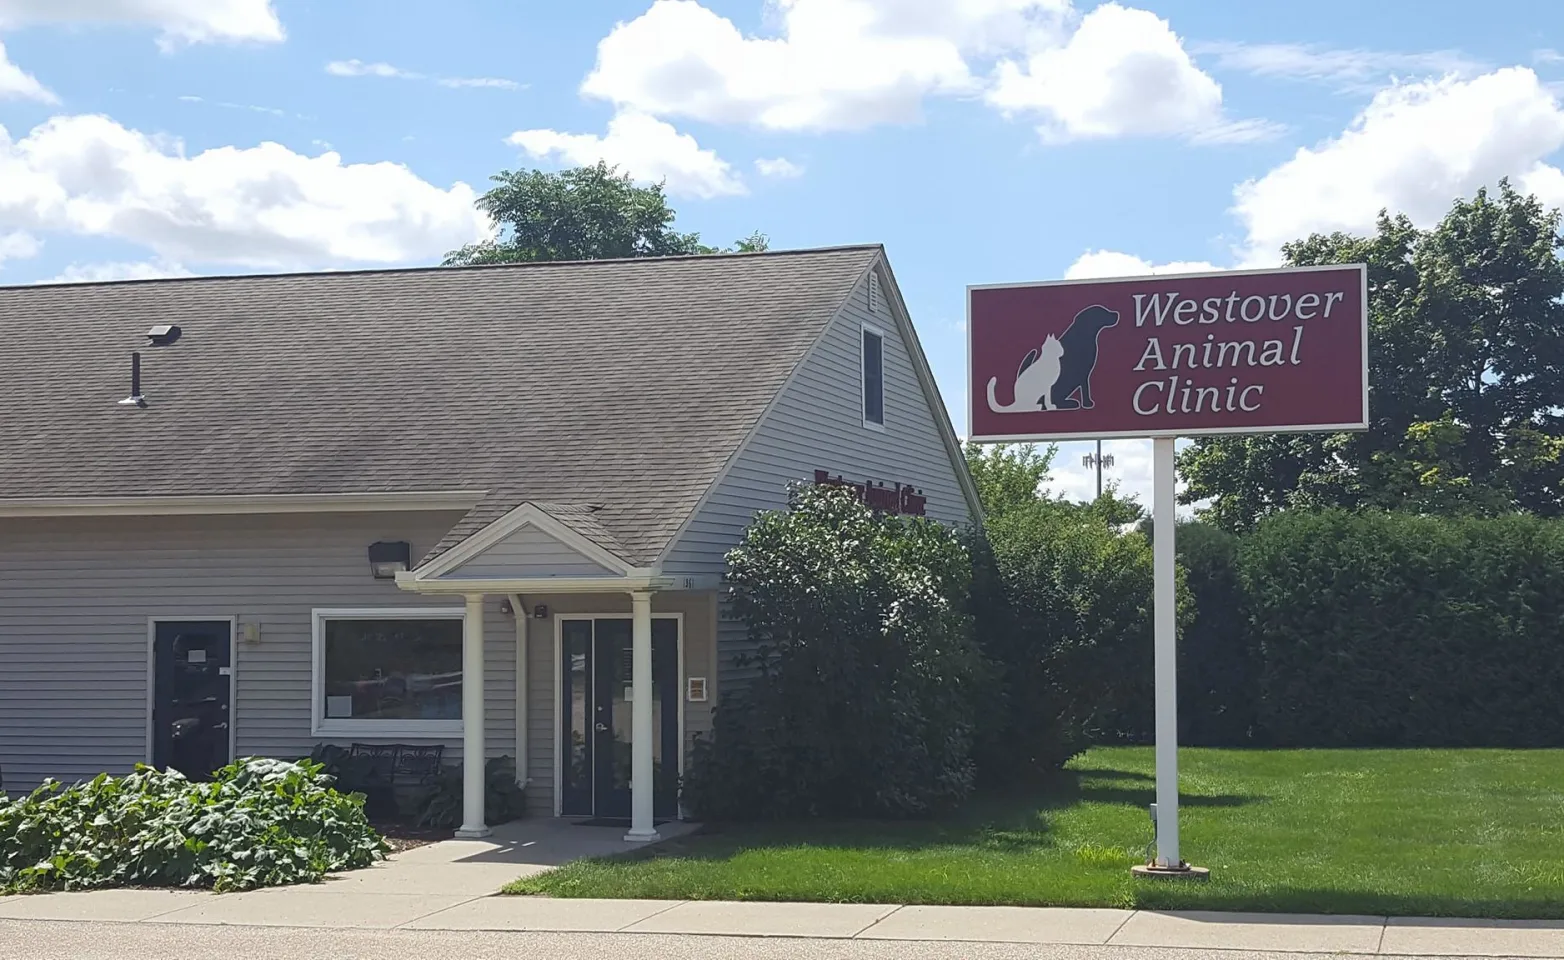 Westover Animal Clinic front entrance and sign